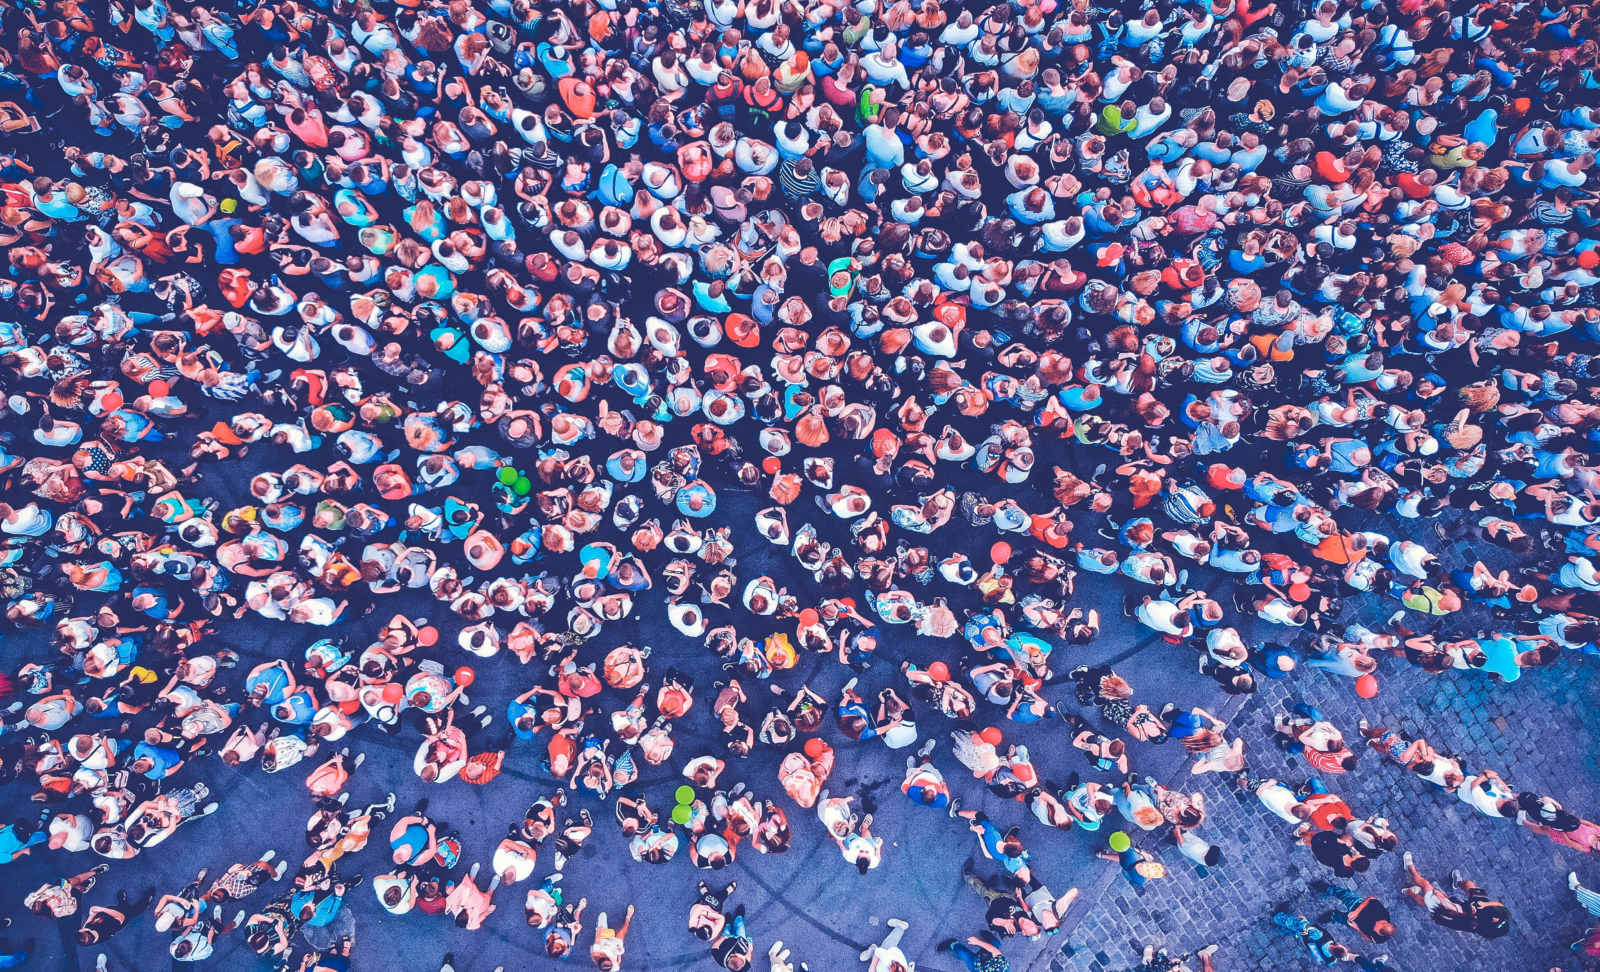 Stock photo of a crowd viewed from above